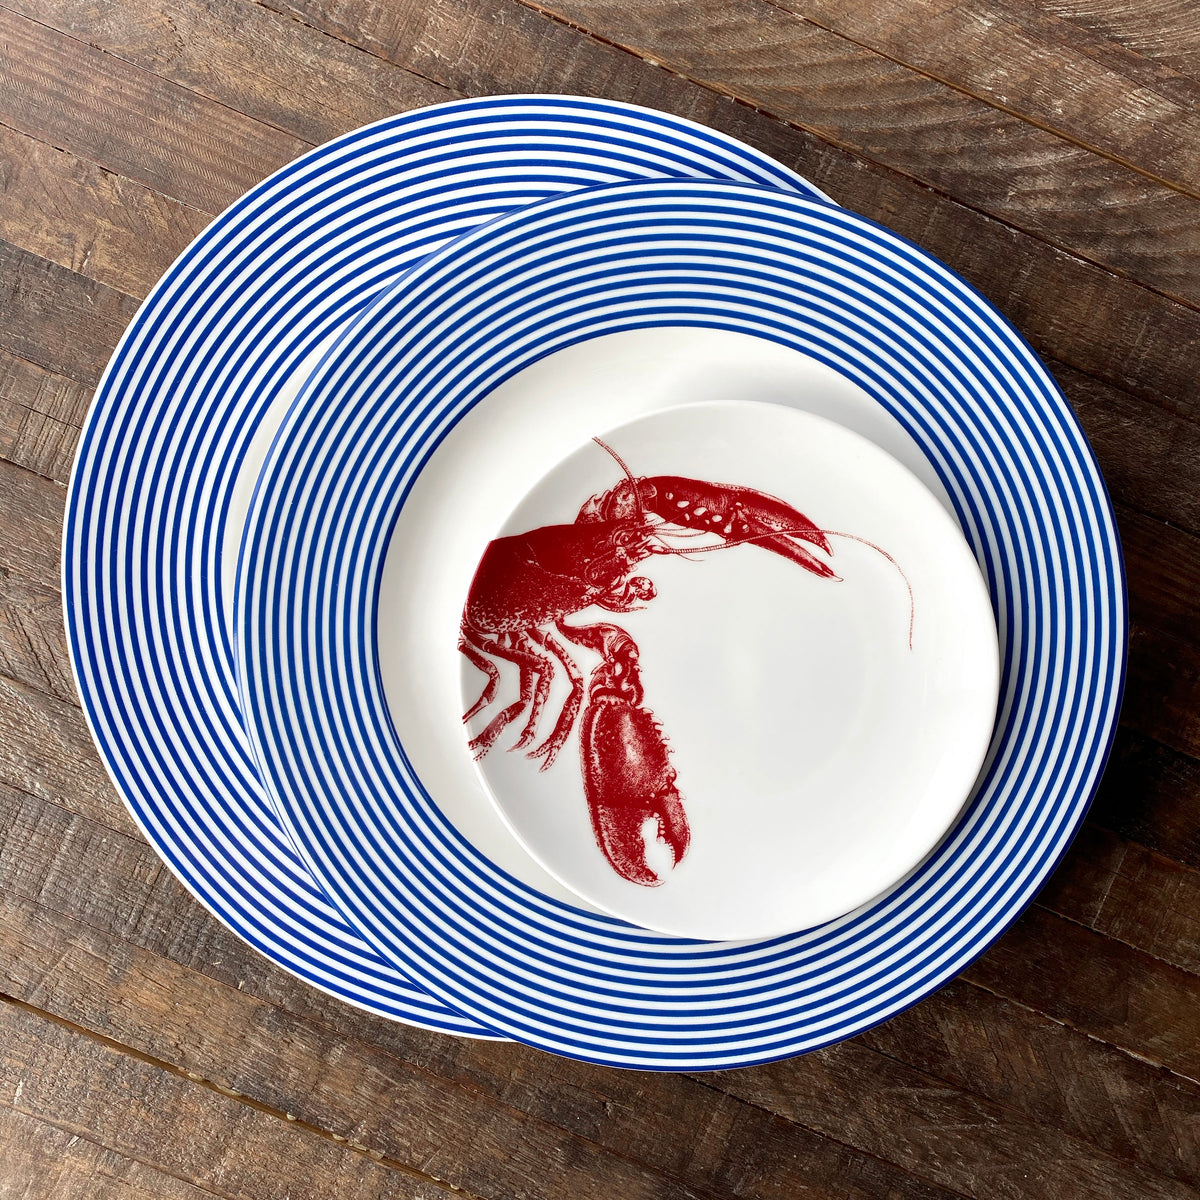 Three high-fired porcelain plates with Newport Stripe patterns are stacked on a wooden surface. The top plate, serving as a Newport Rimmed Charger Plate by Caskata Artisanal Home, features a red lobster illustration in the center.